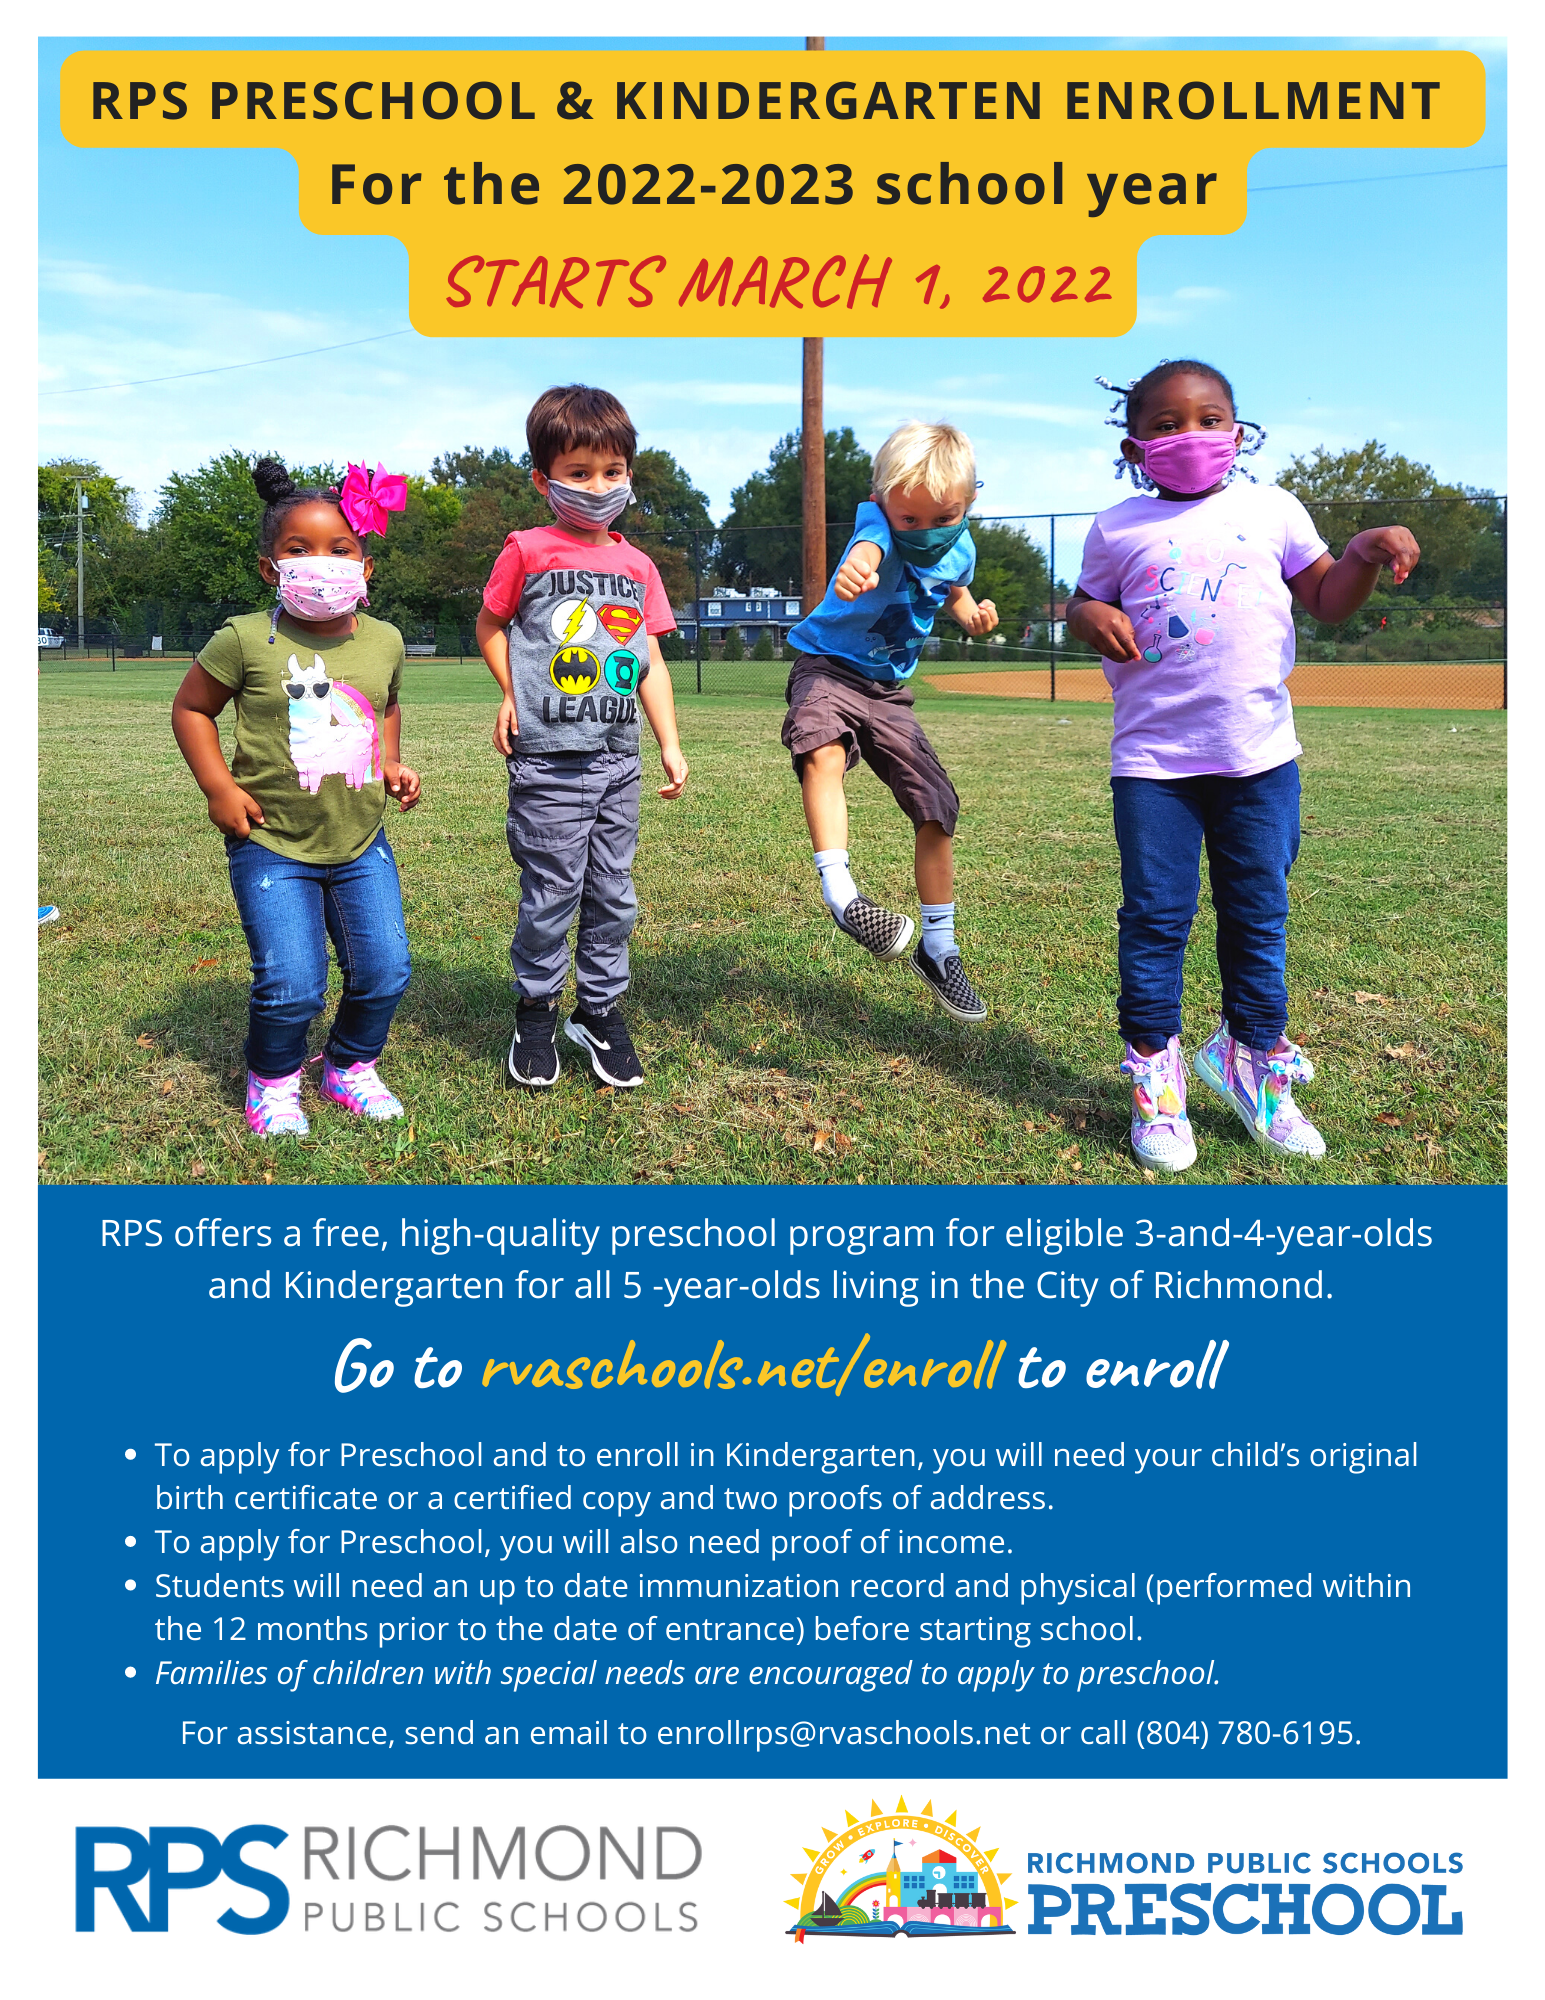 2022-2023 Preschool Requirements and Eligibility